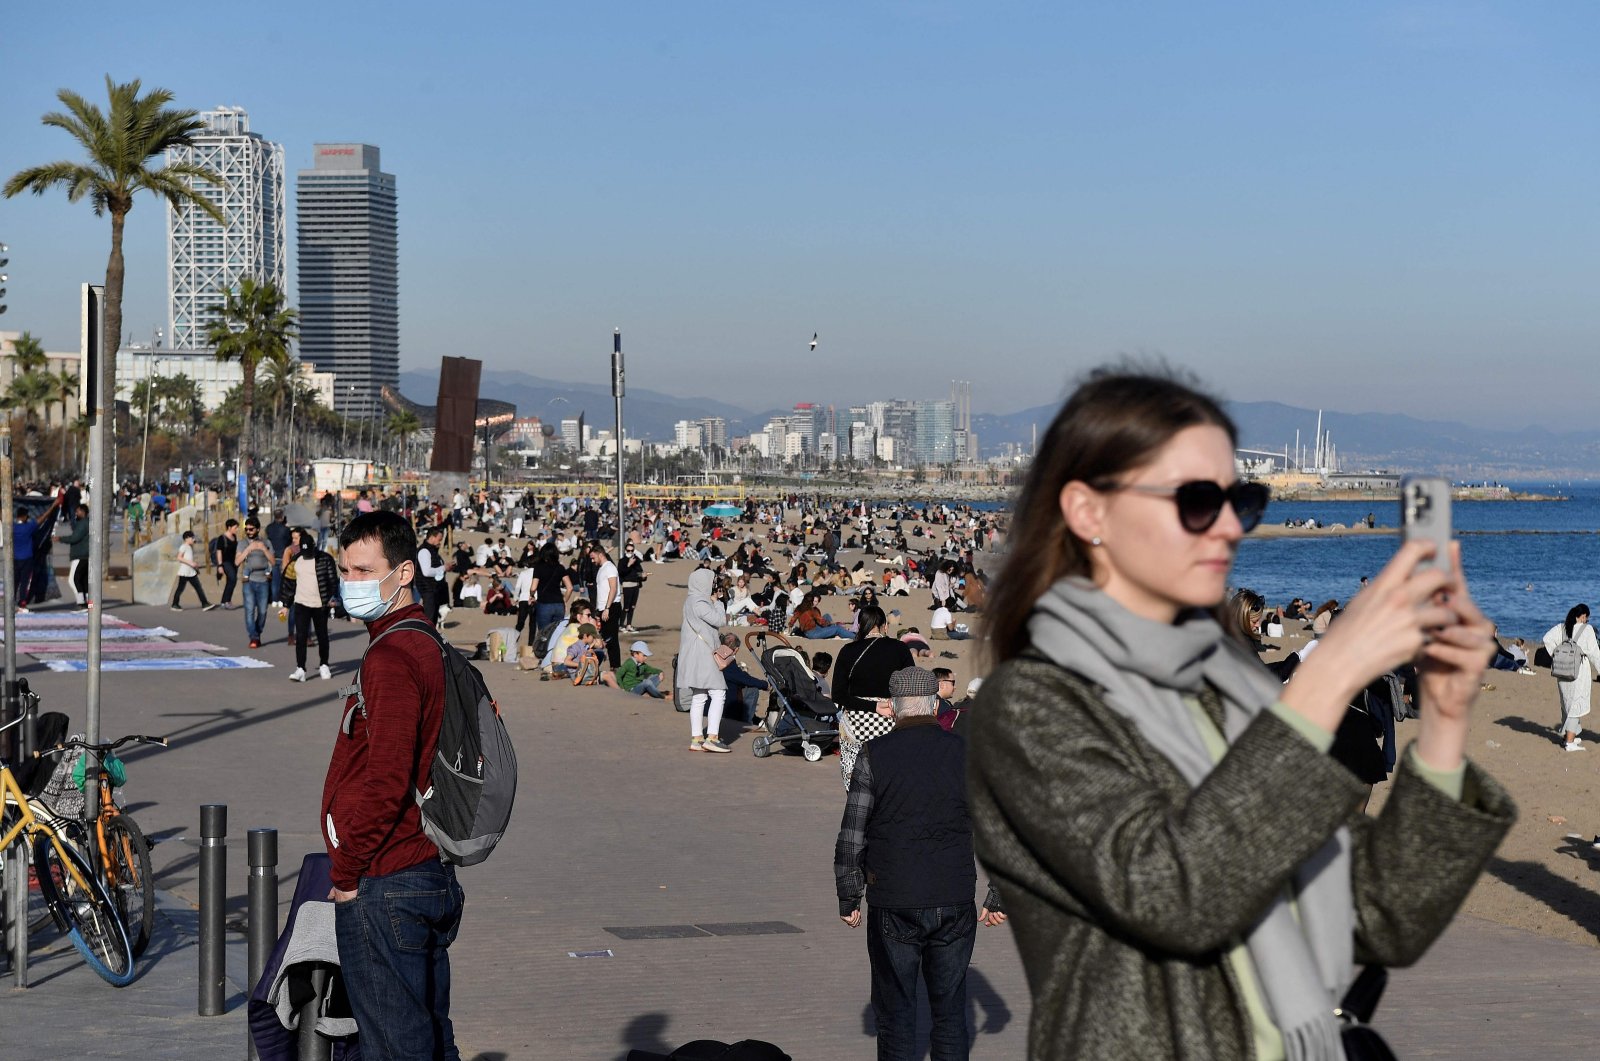 People enjoy a day out on Barceloneta Beach in Barcelona, Spain, Dec. 31, 2021. (AFP Photo)